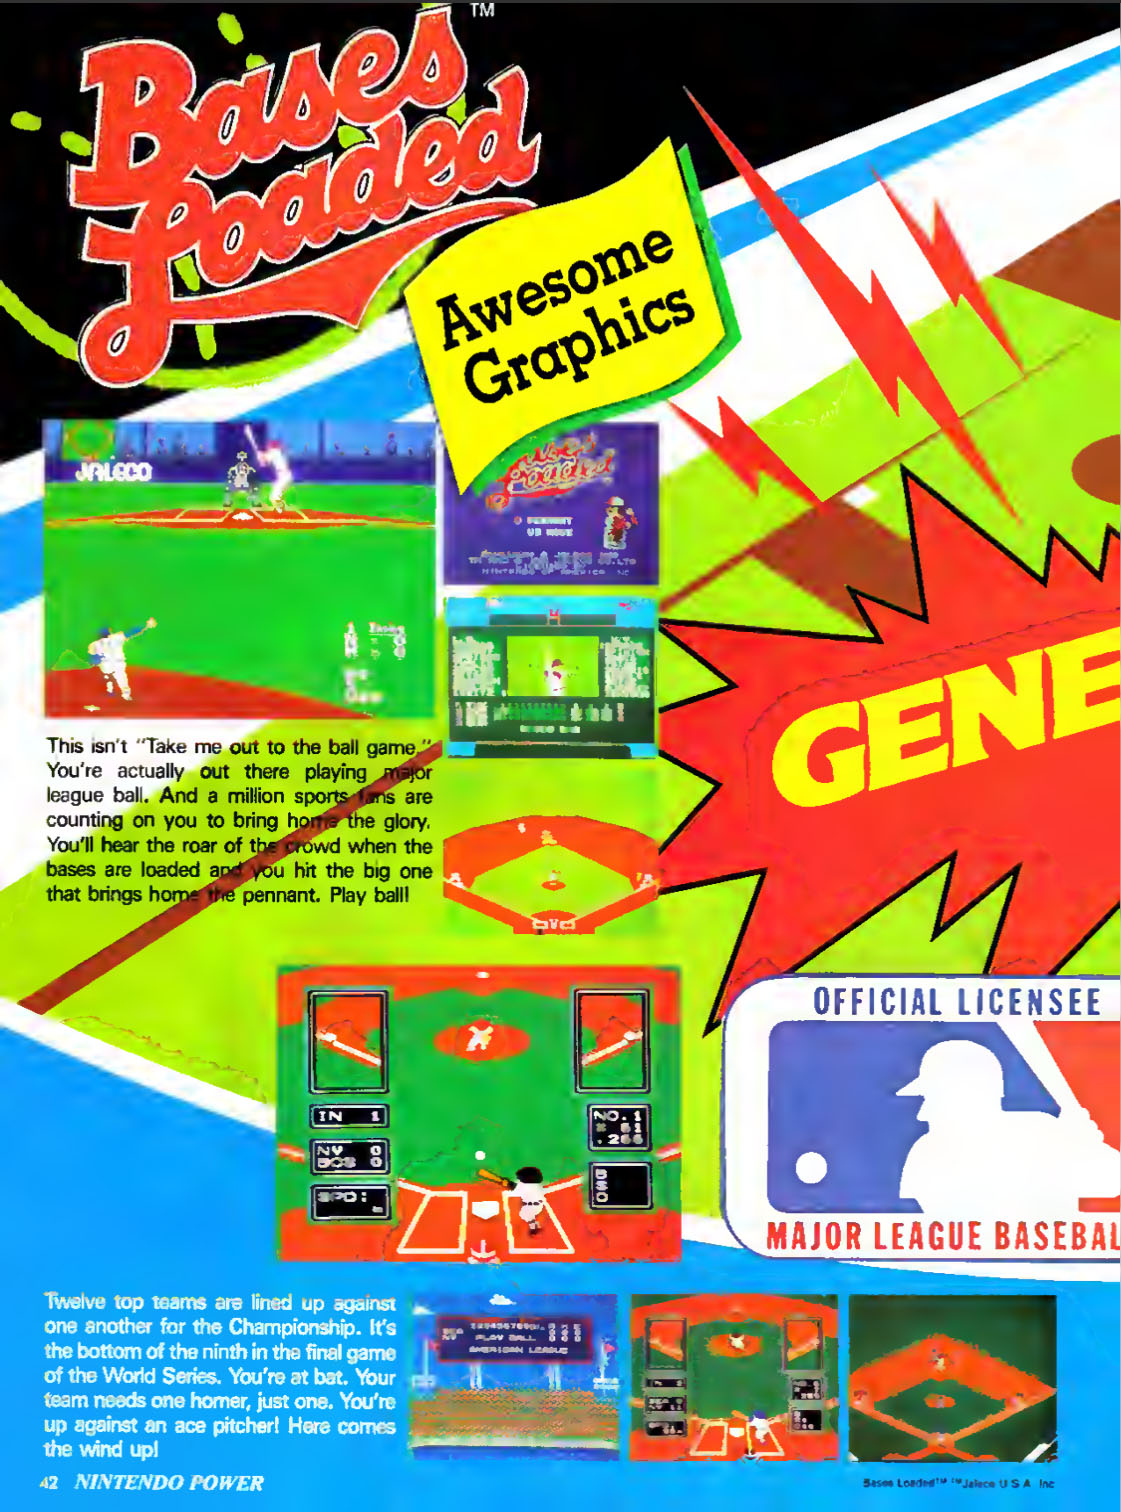 Baseball Round Up, Nintendo Power July-August 1988 page 42